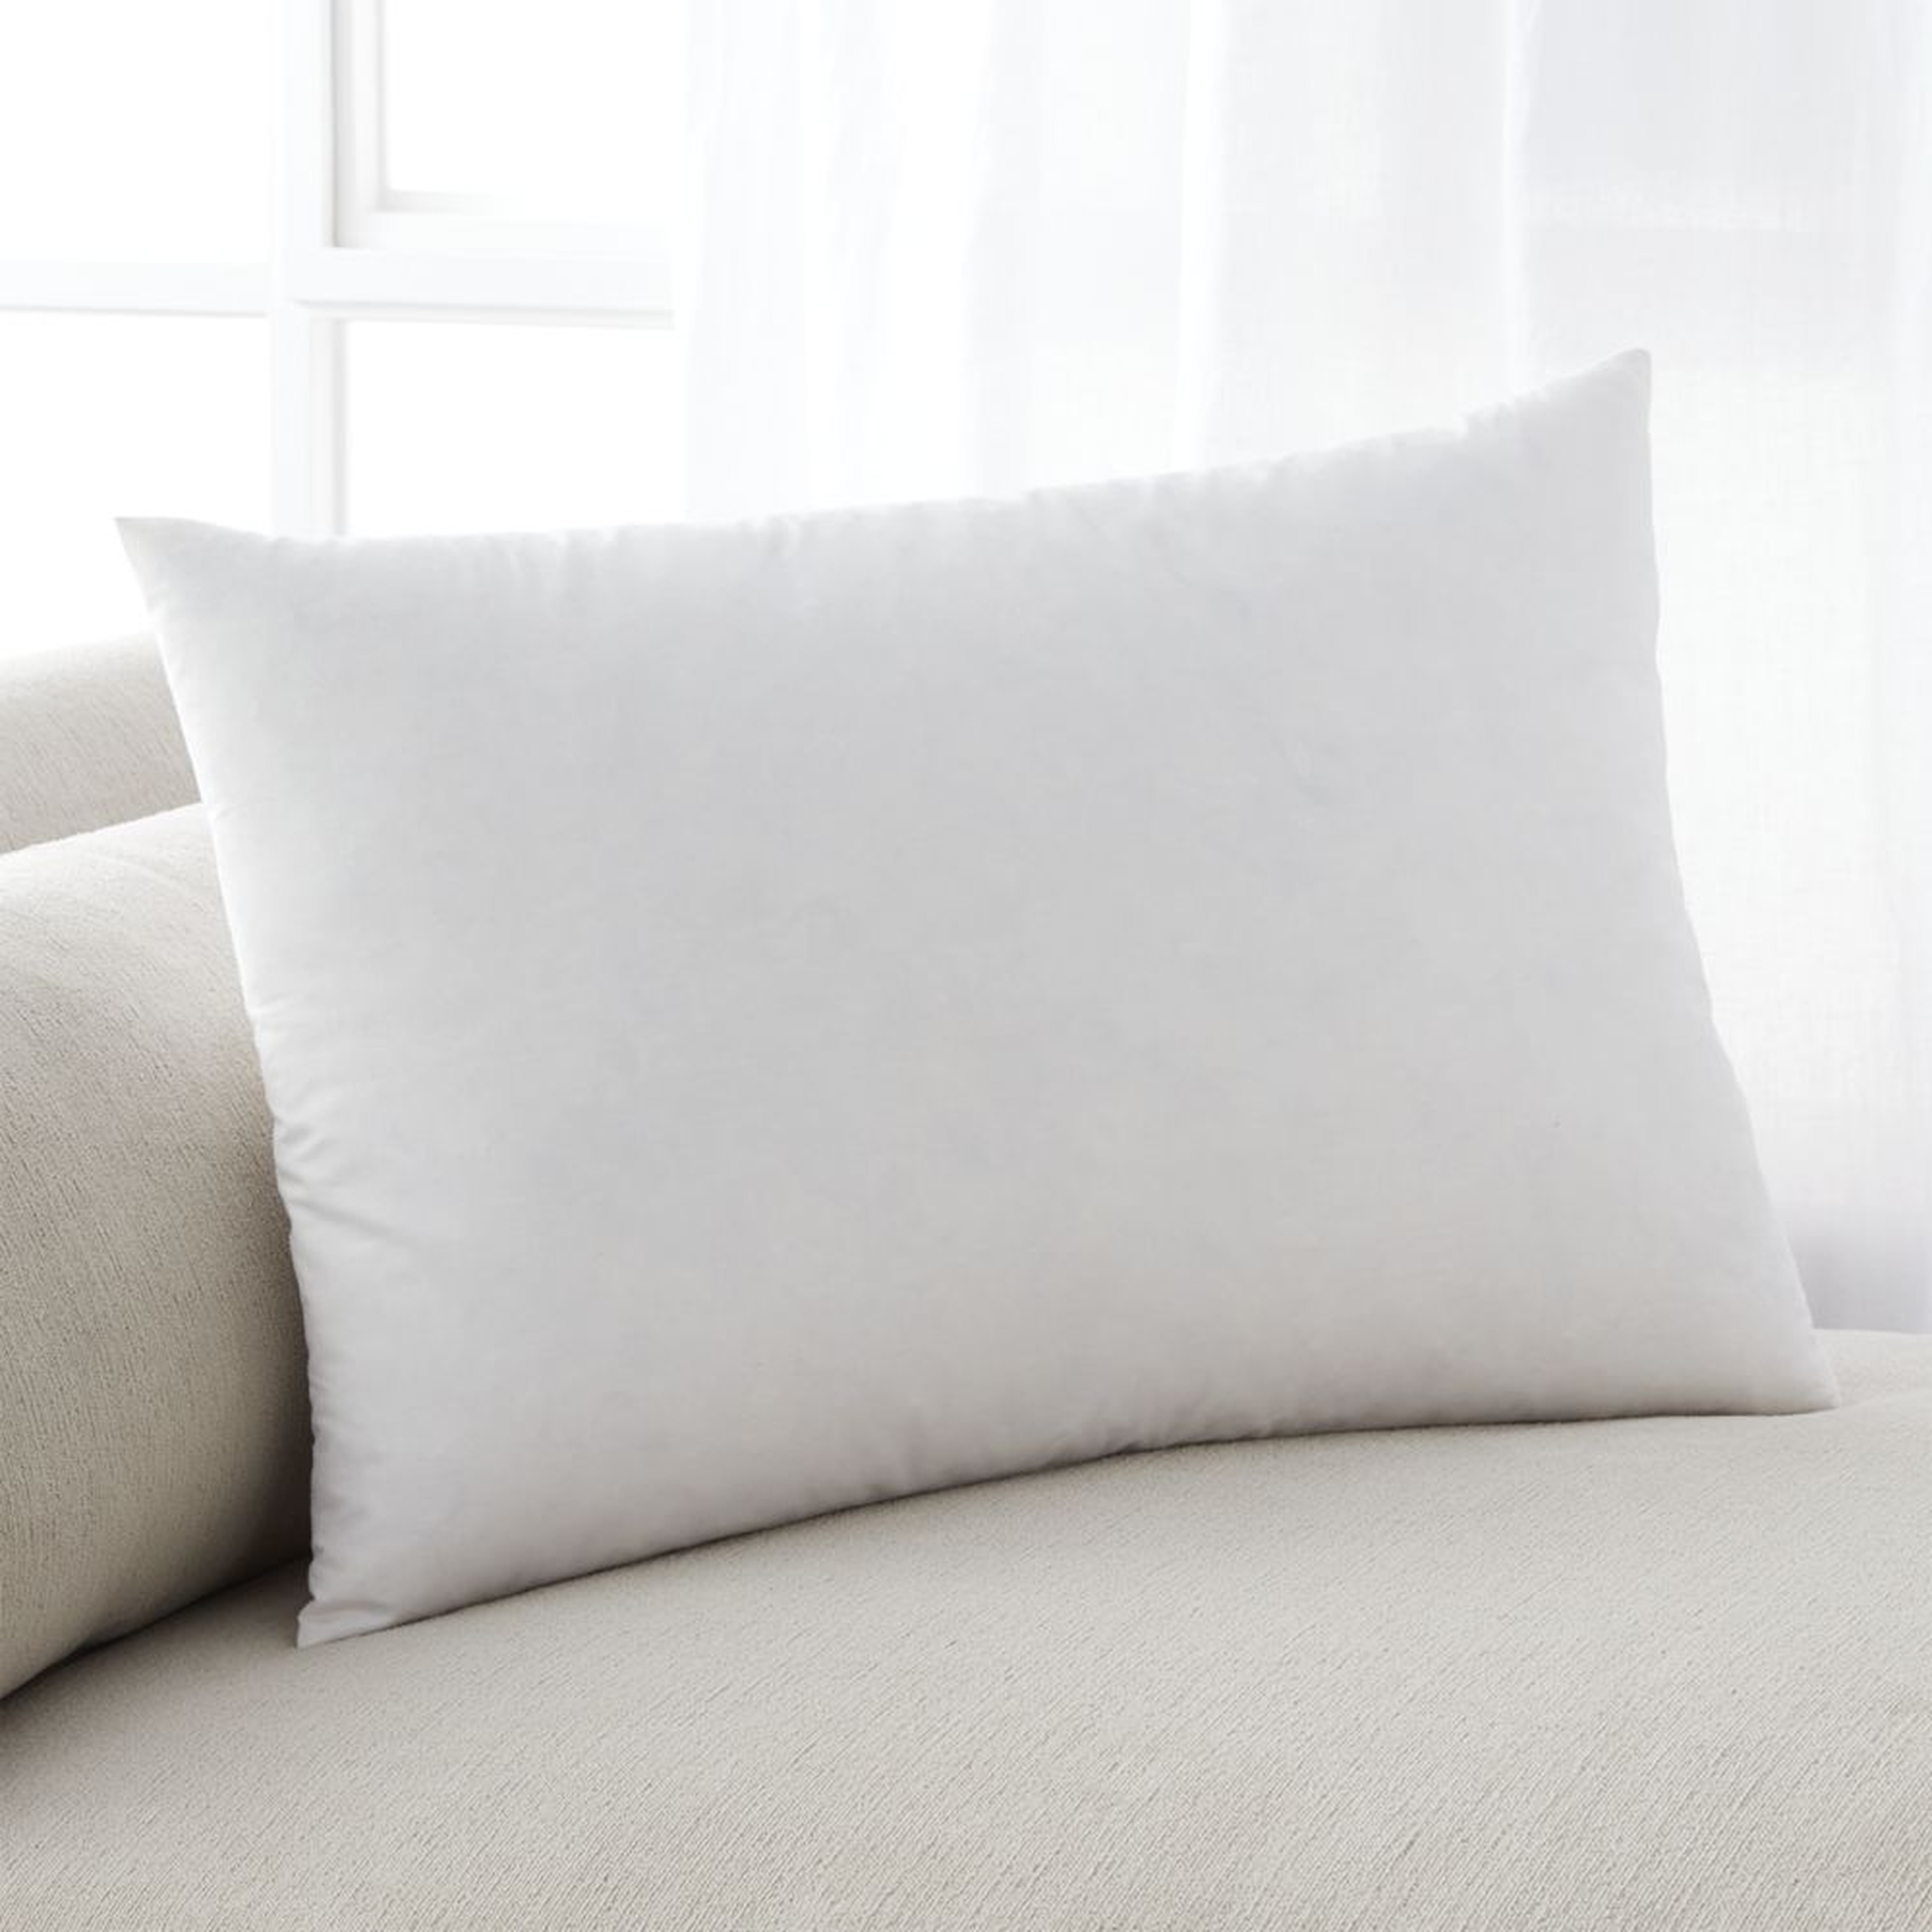 Feather-Down 22"x15" Pillow Insert - Crate and Barrel